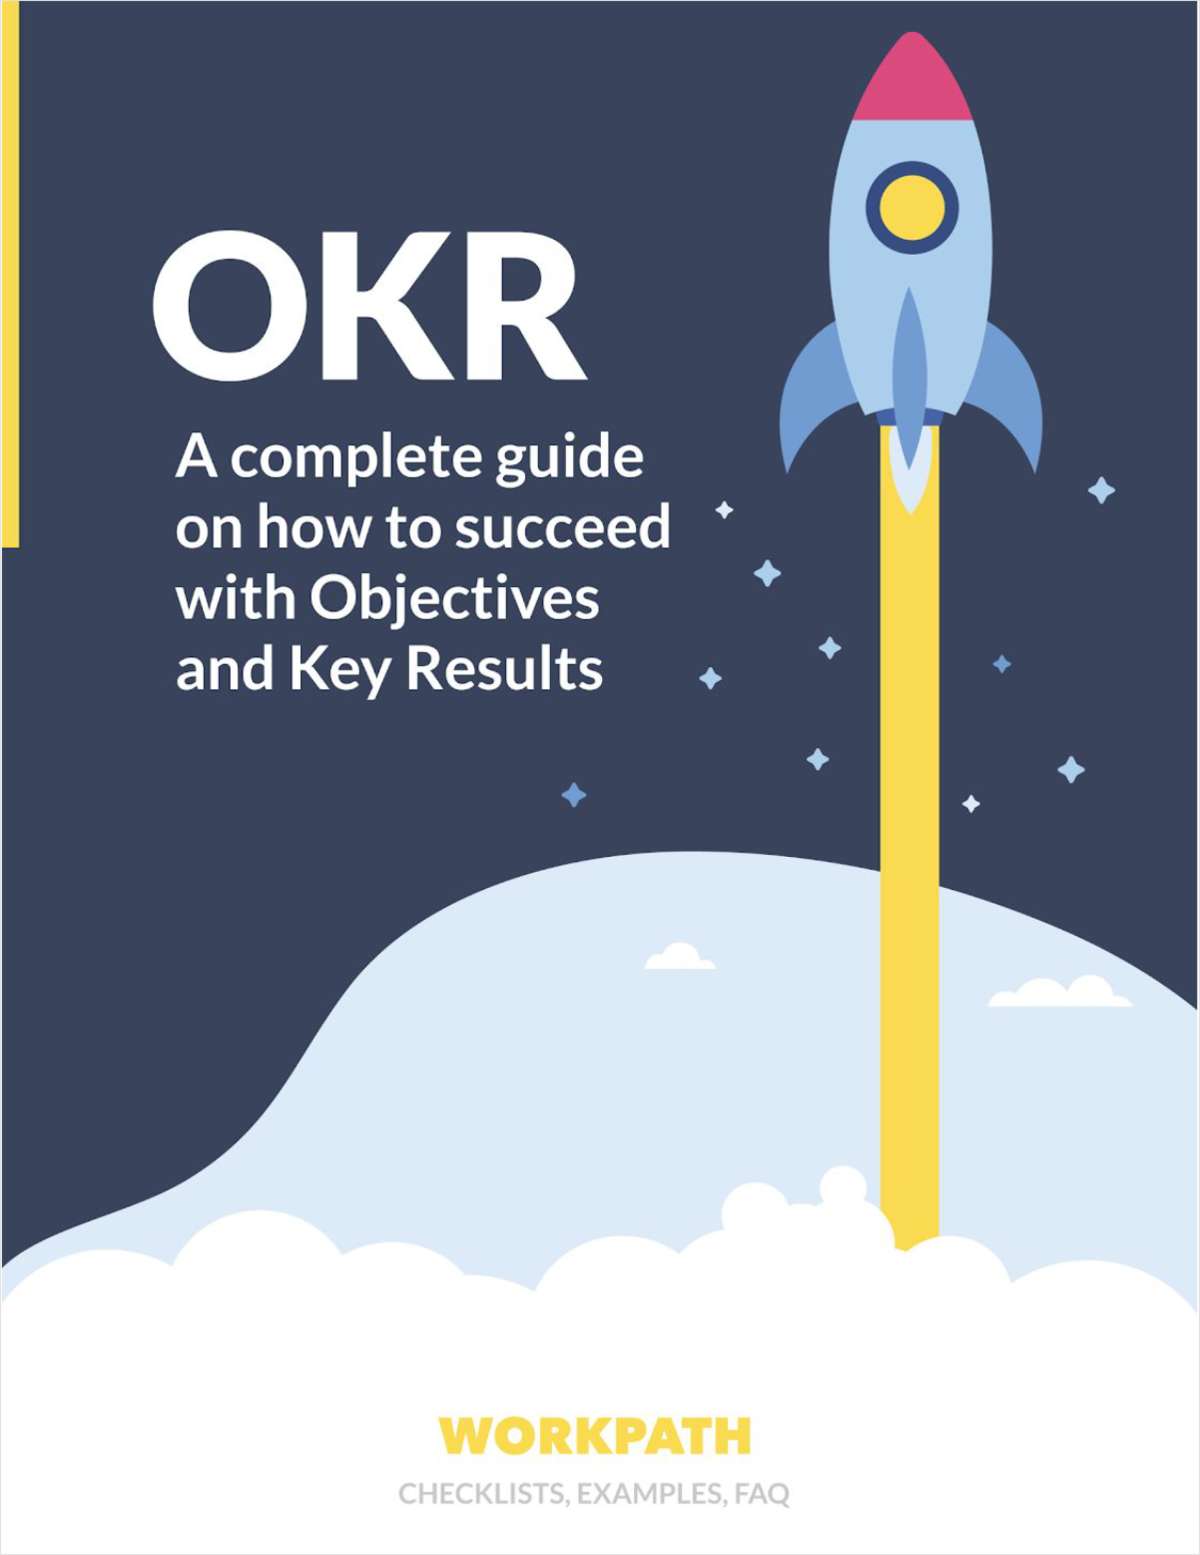 How To Succeed With Objectives and Key Results